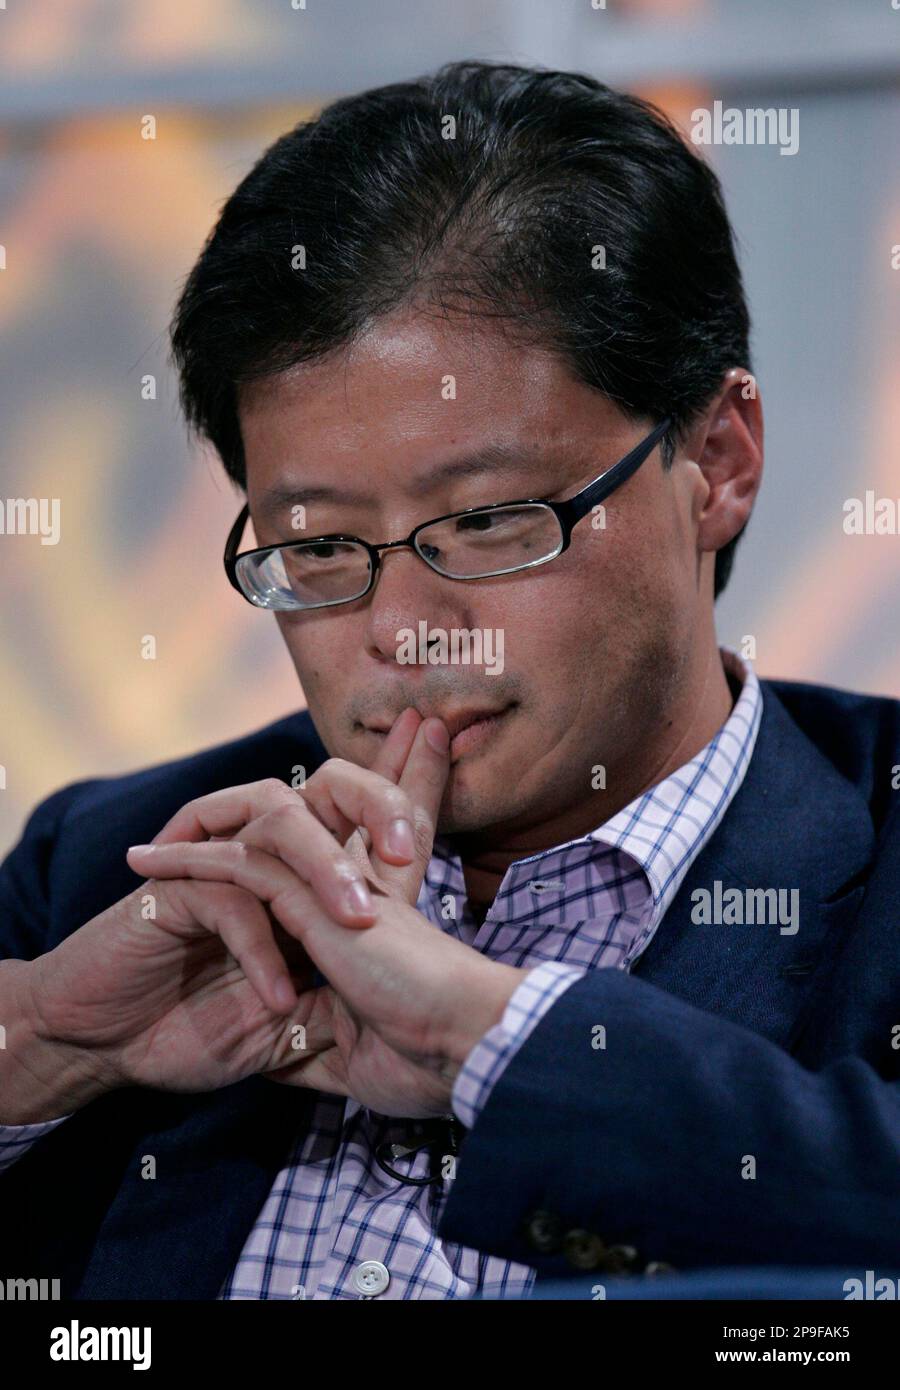 Yahoo CEO Jerry Yang ponders a question during a talk at the Web 2.0 Summit in San Francisco, Wednesday, Nov. 5, 2008. Facing a legal battle that would have illuminated its widening market power, Google Inc. turned its back on its struggling rival Yahoo Inc. and pulled the plug on an Internet advertising partnership that had been conceived to keep Yahoo out of Microsoft Corp.'s clutches. (AP Photo/Paul Sakuma) Stock Photo